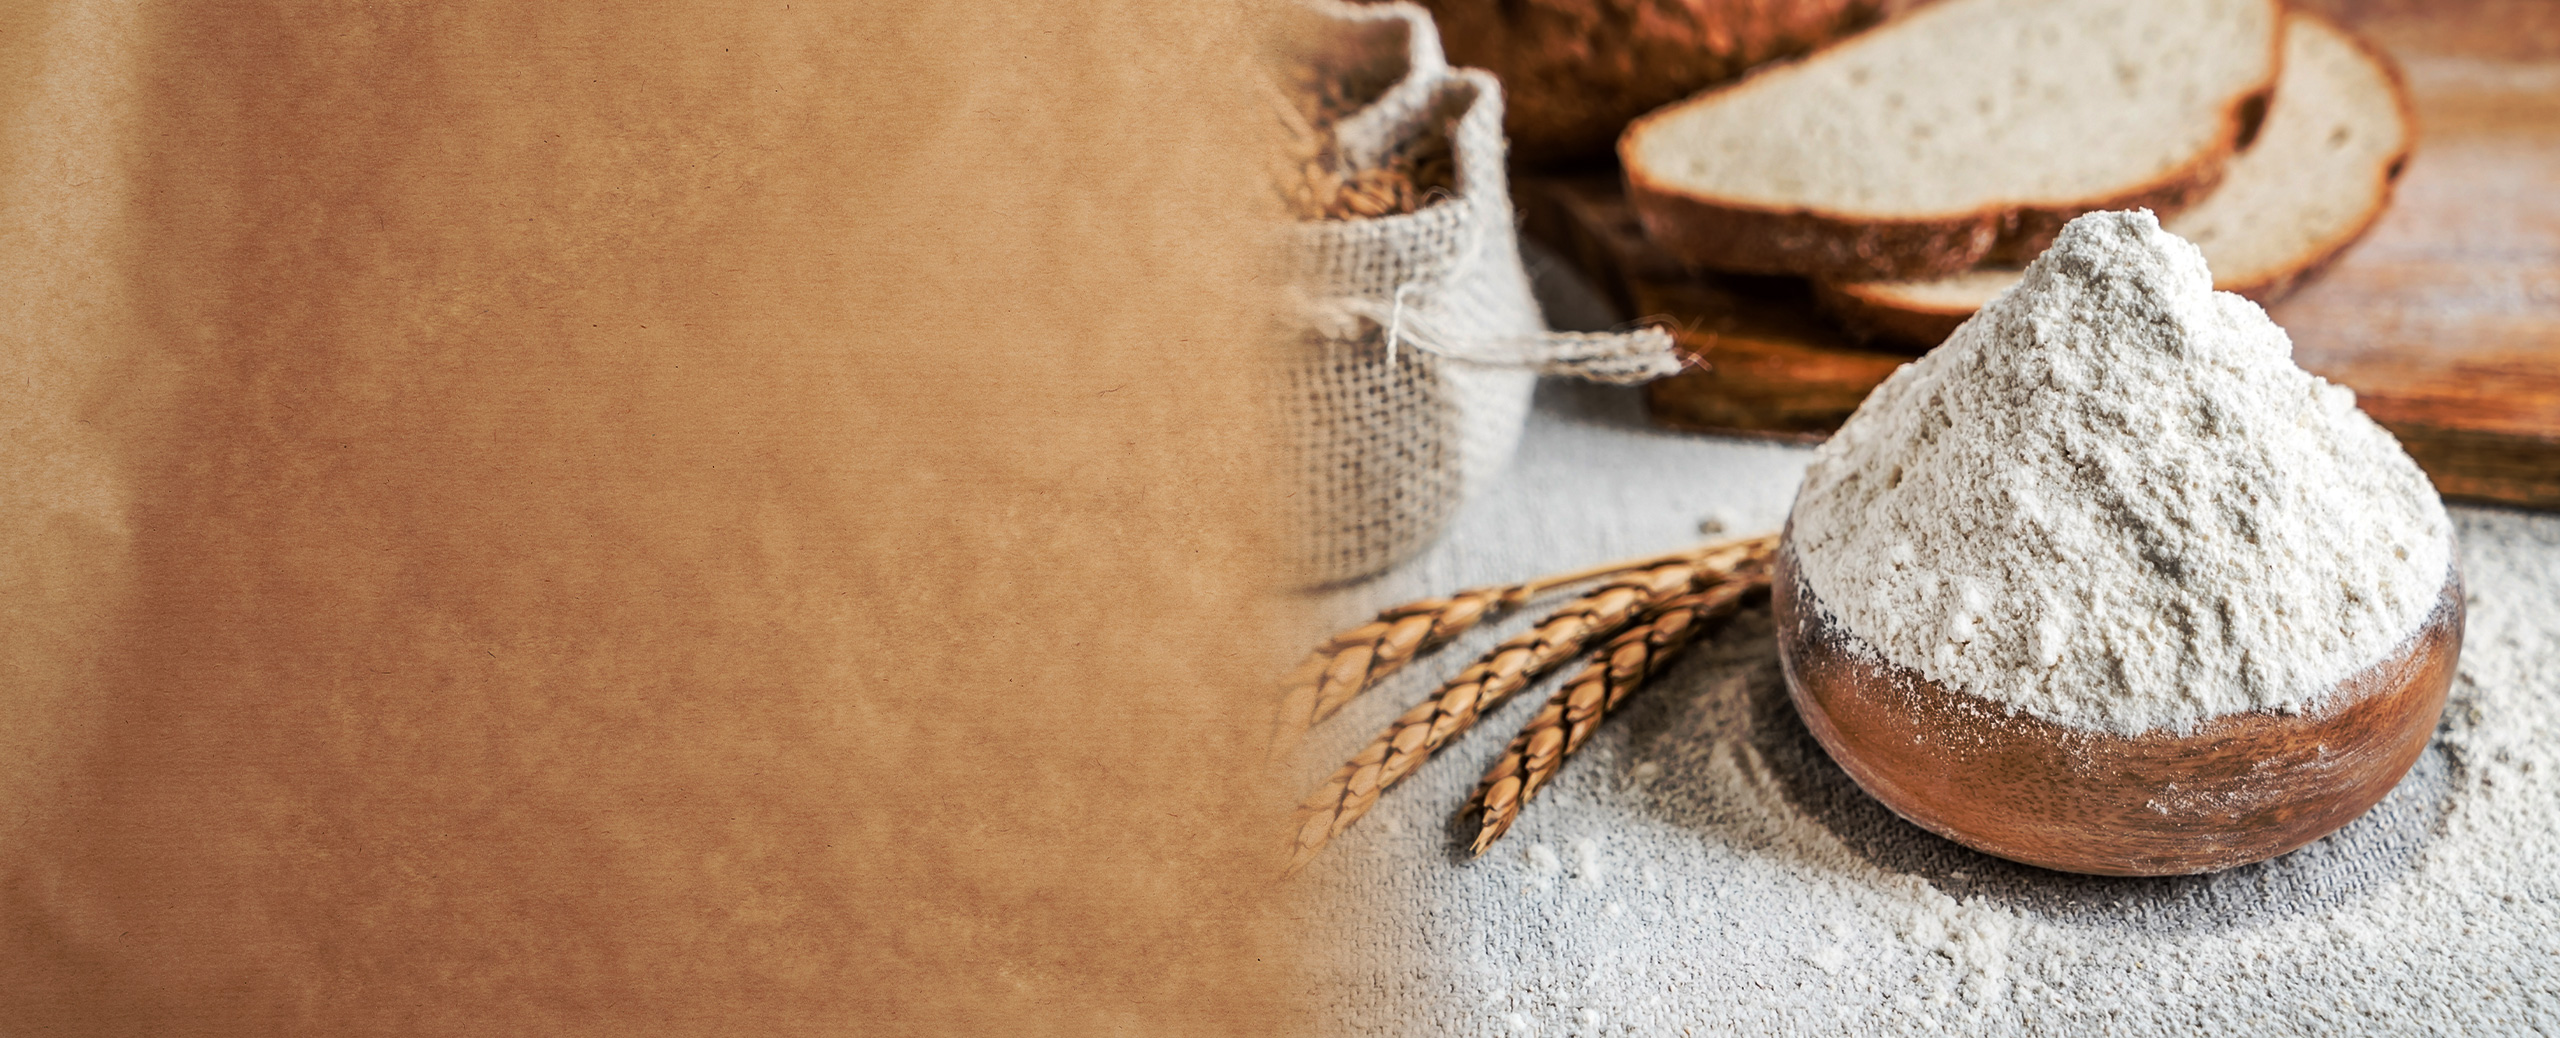 Bakery Ingredient Suppliers - Flours, Improvers and Thickeners